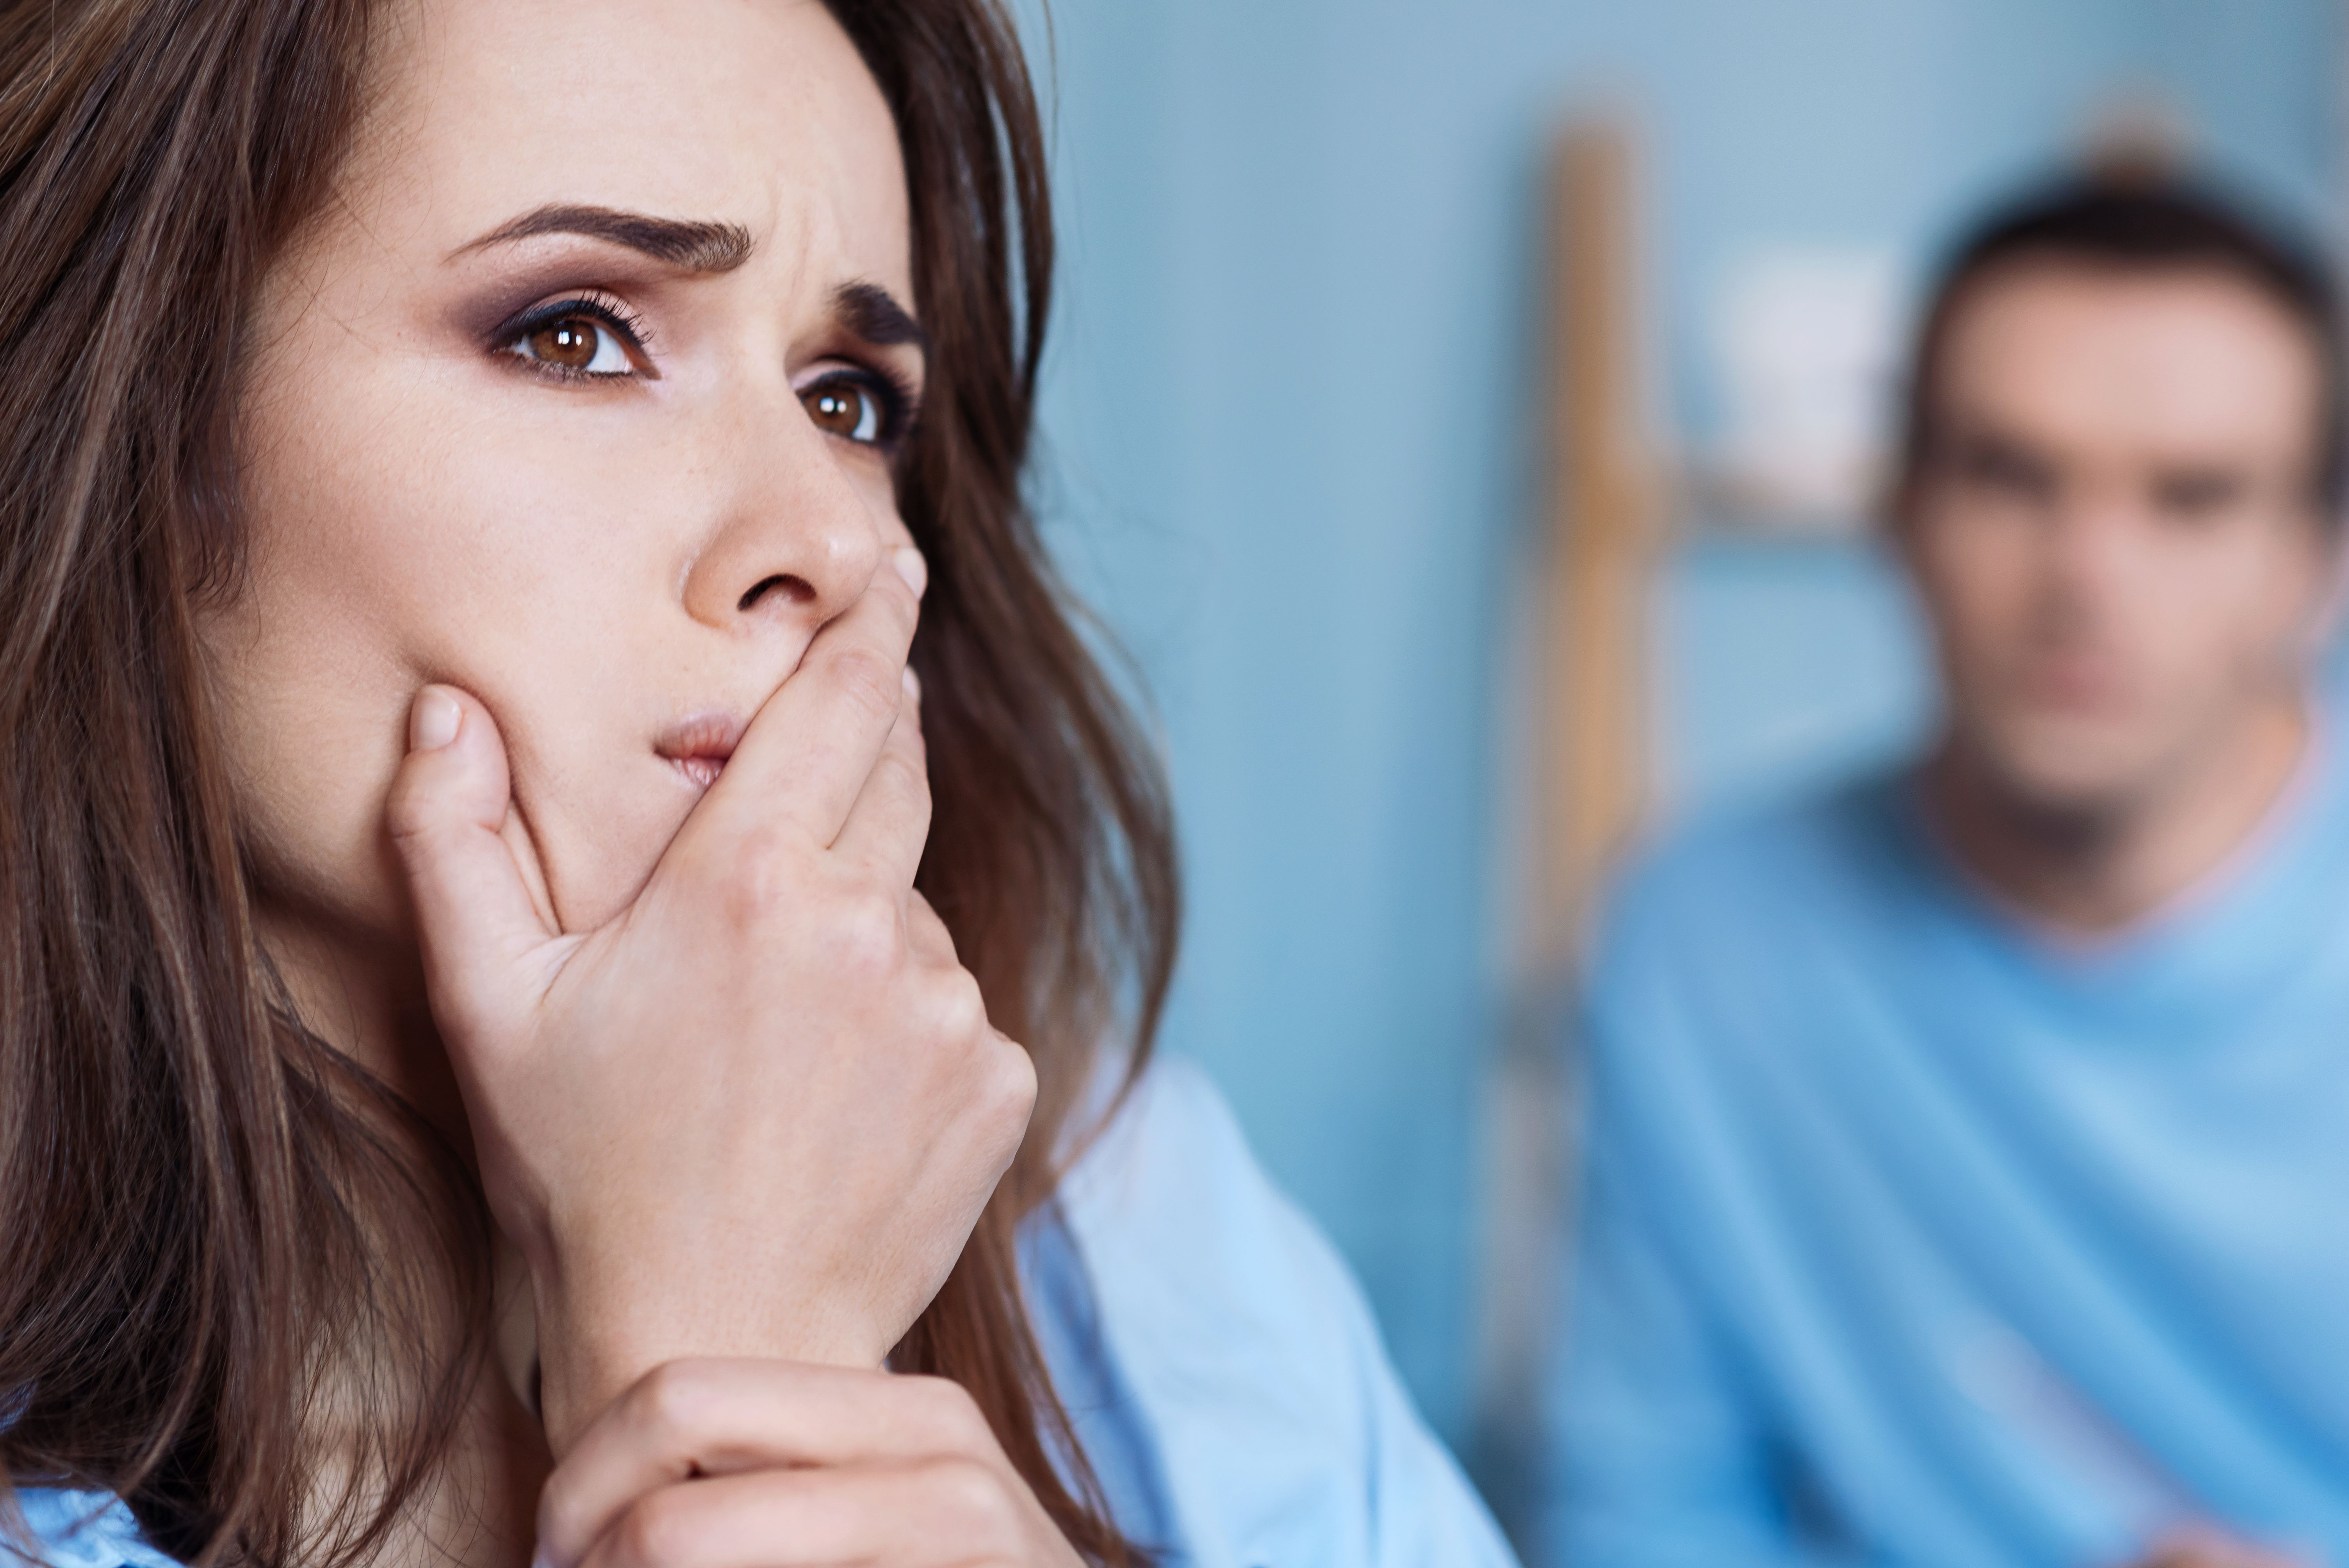 A woman looks worried with her partner. | Source: Shutterstock